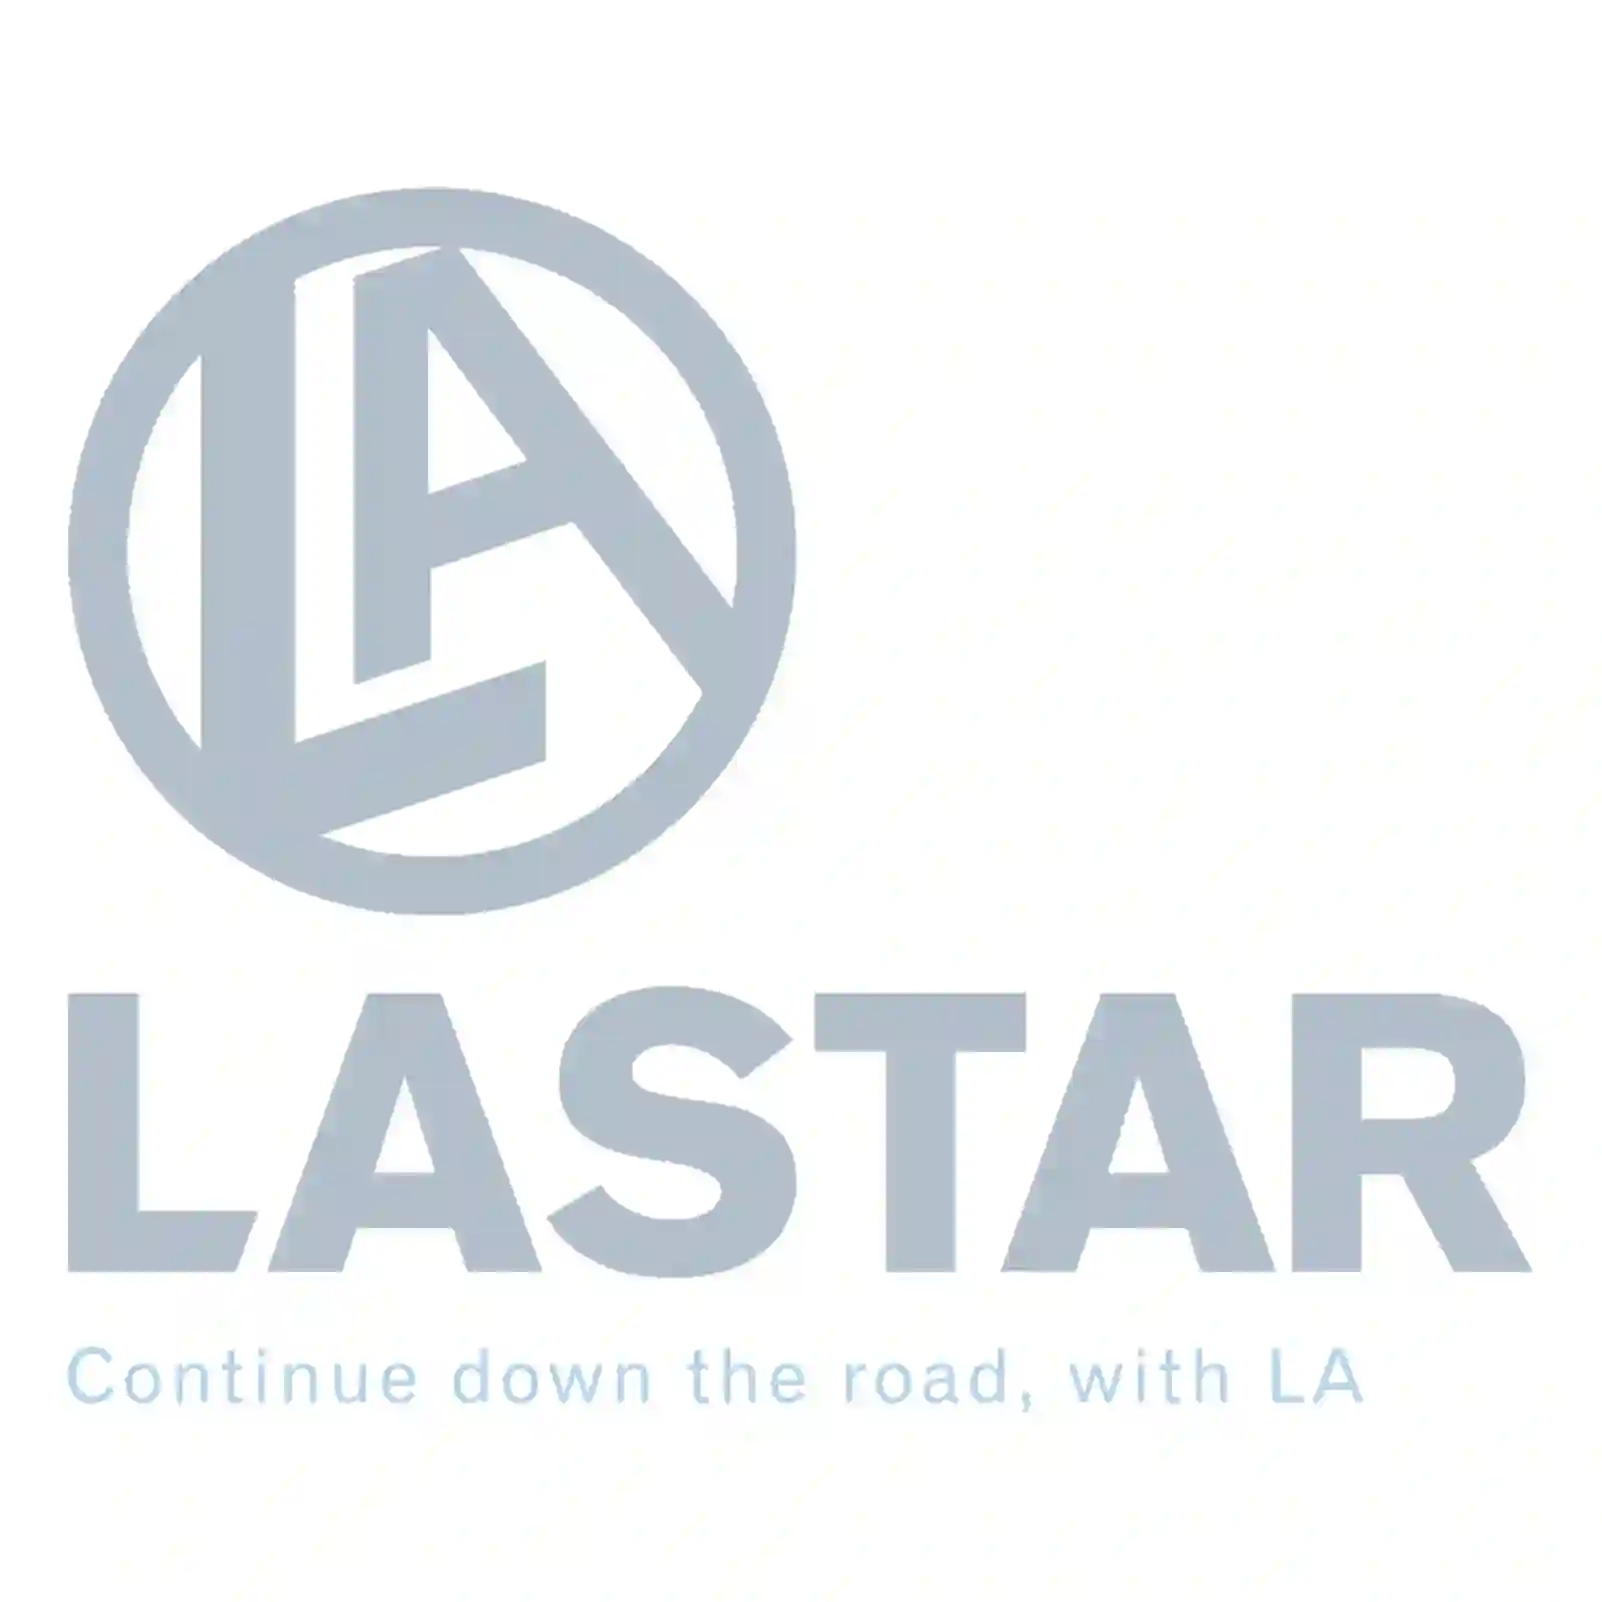  Wheel bearing unit, without hub || Lastar Spare Part | Truck Spare Parts, Auotomotive Spare Parts